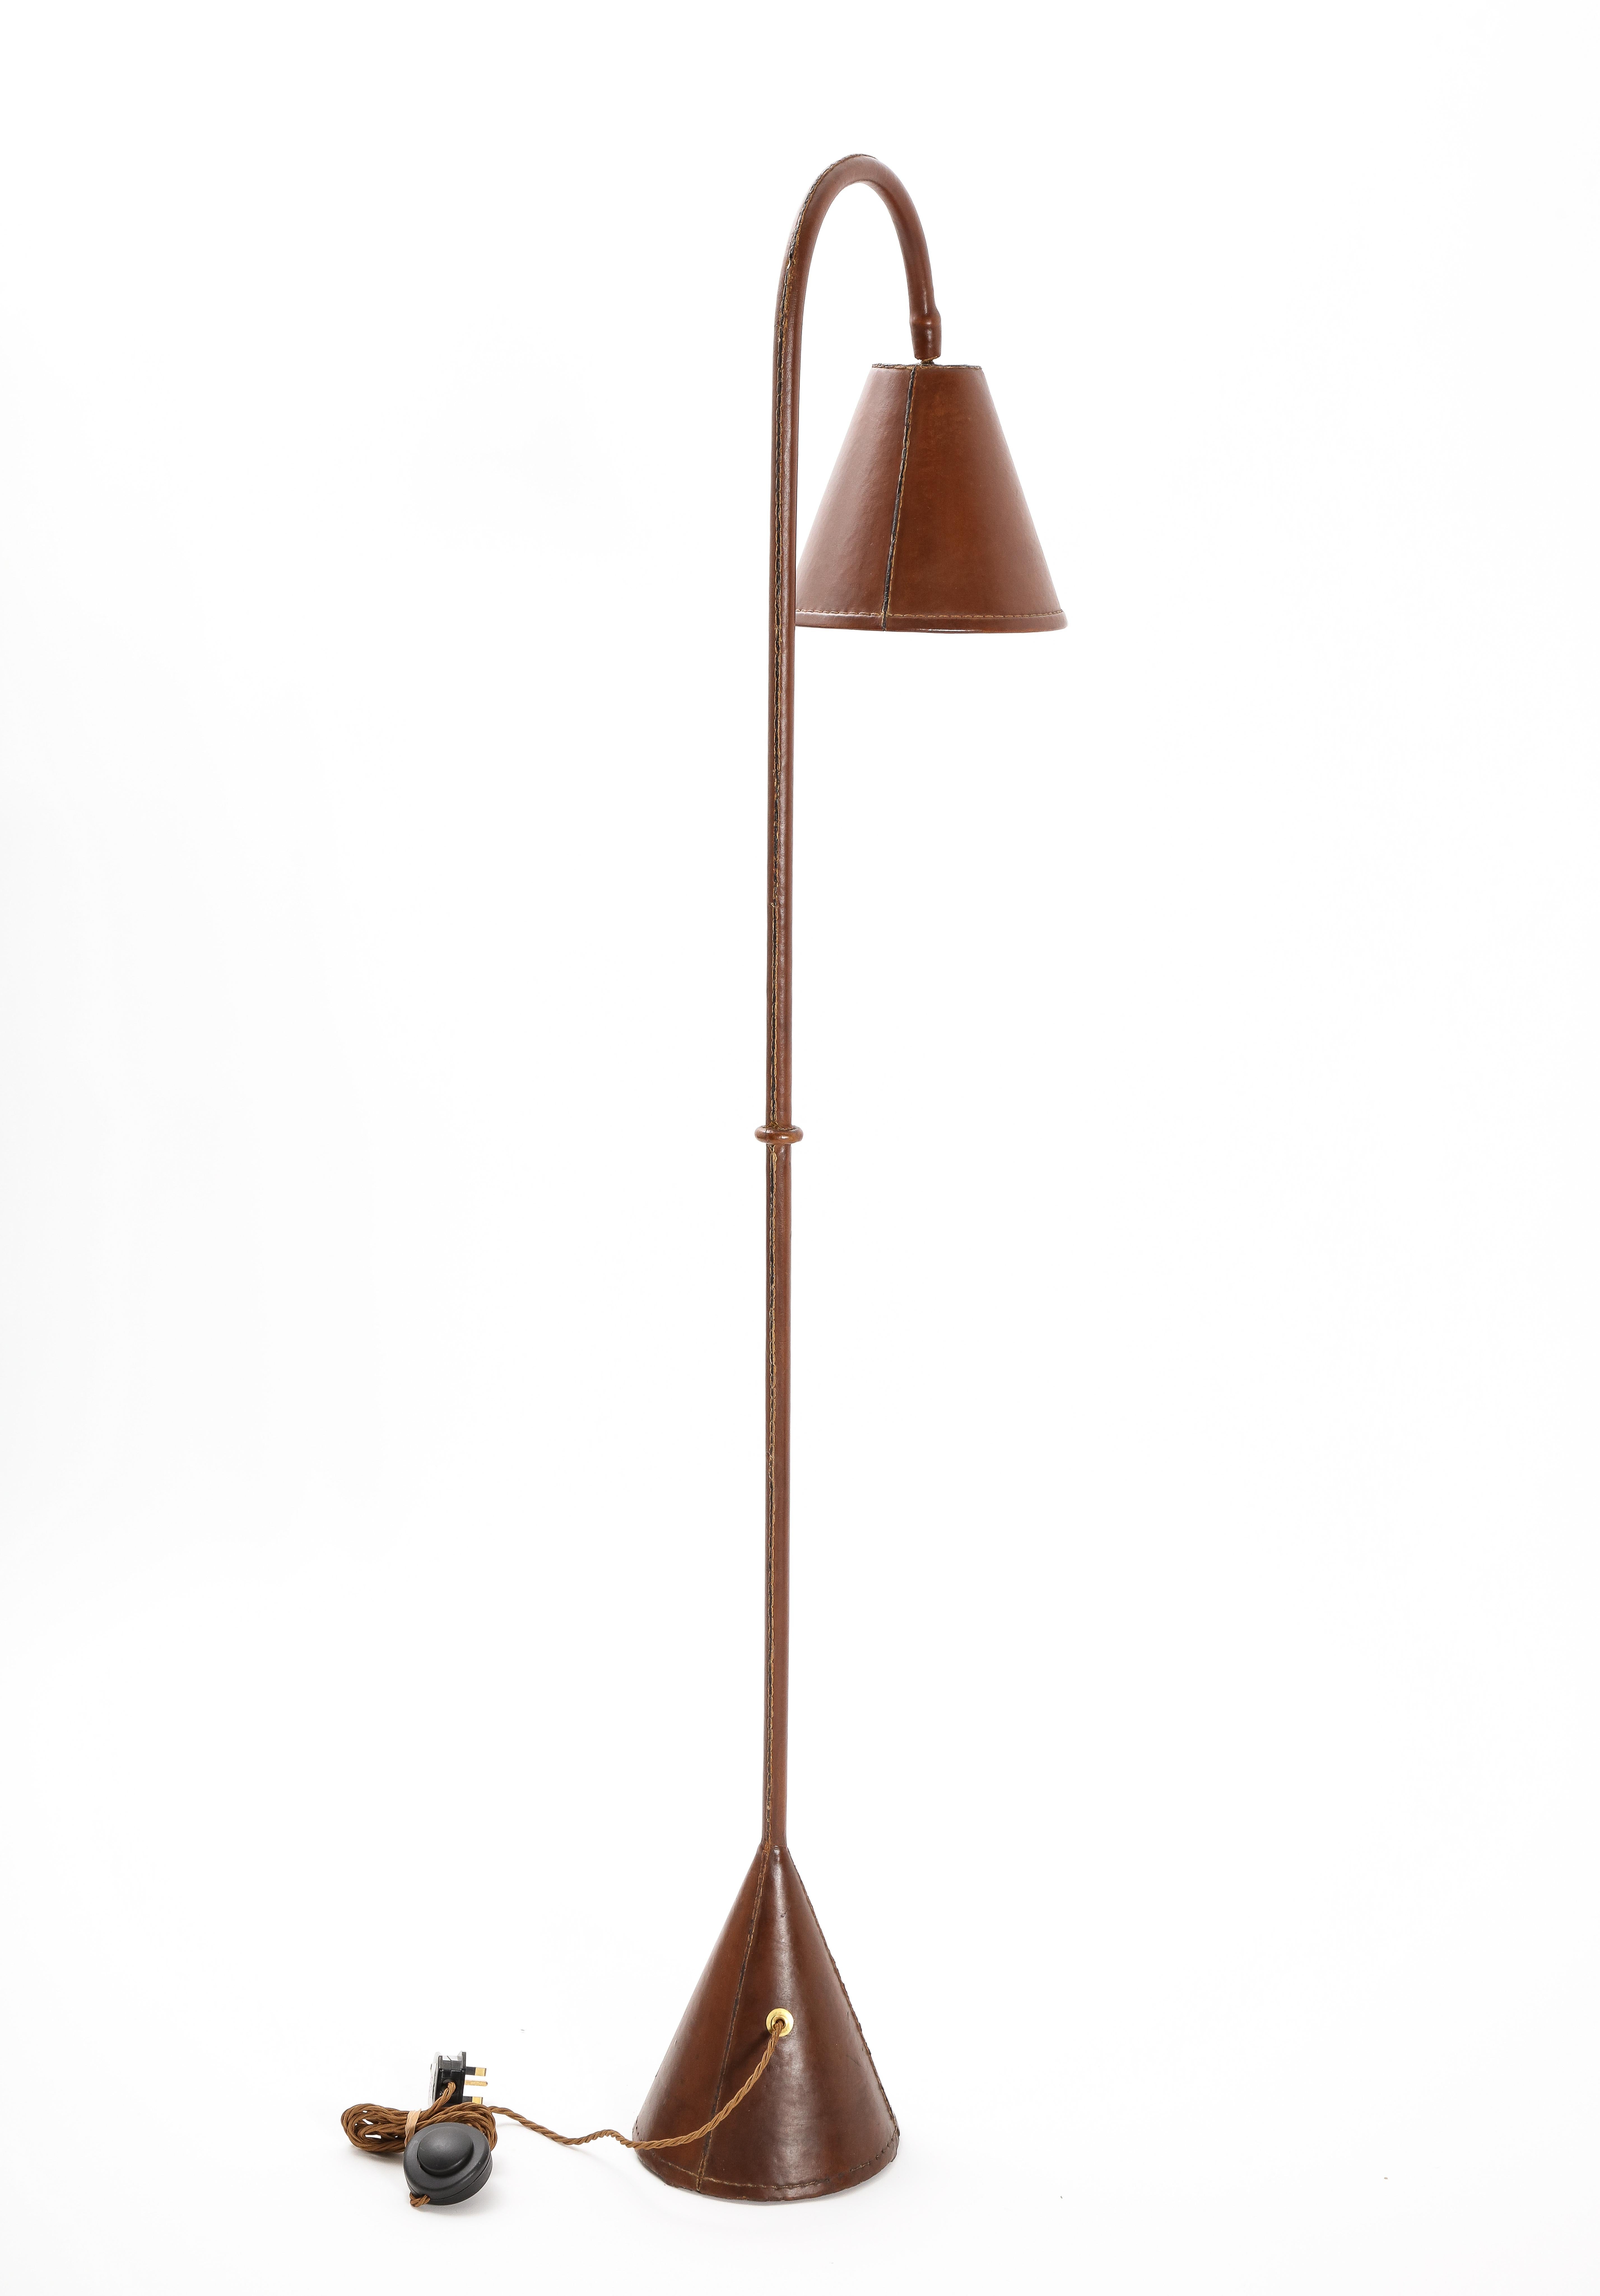 Steel Jacques Adnet Dual Cone Leather Floor Lamps. France 1950s